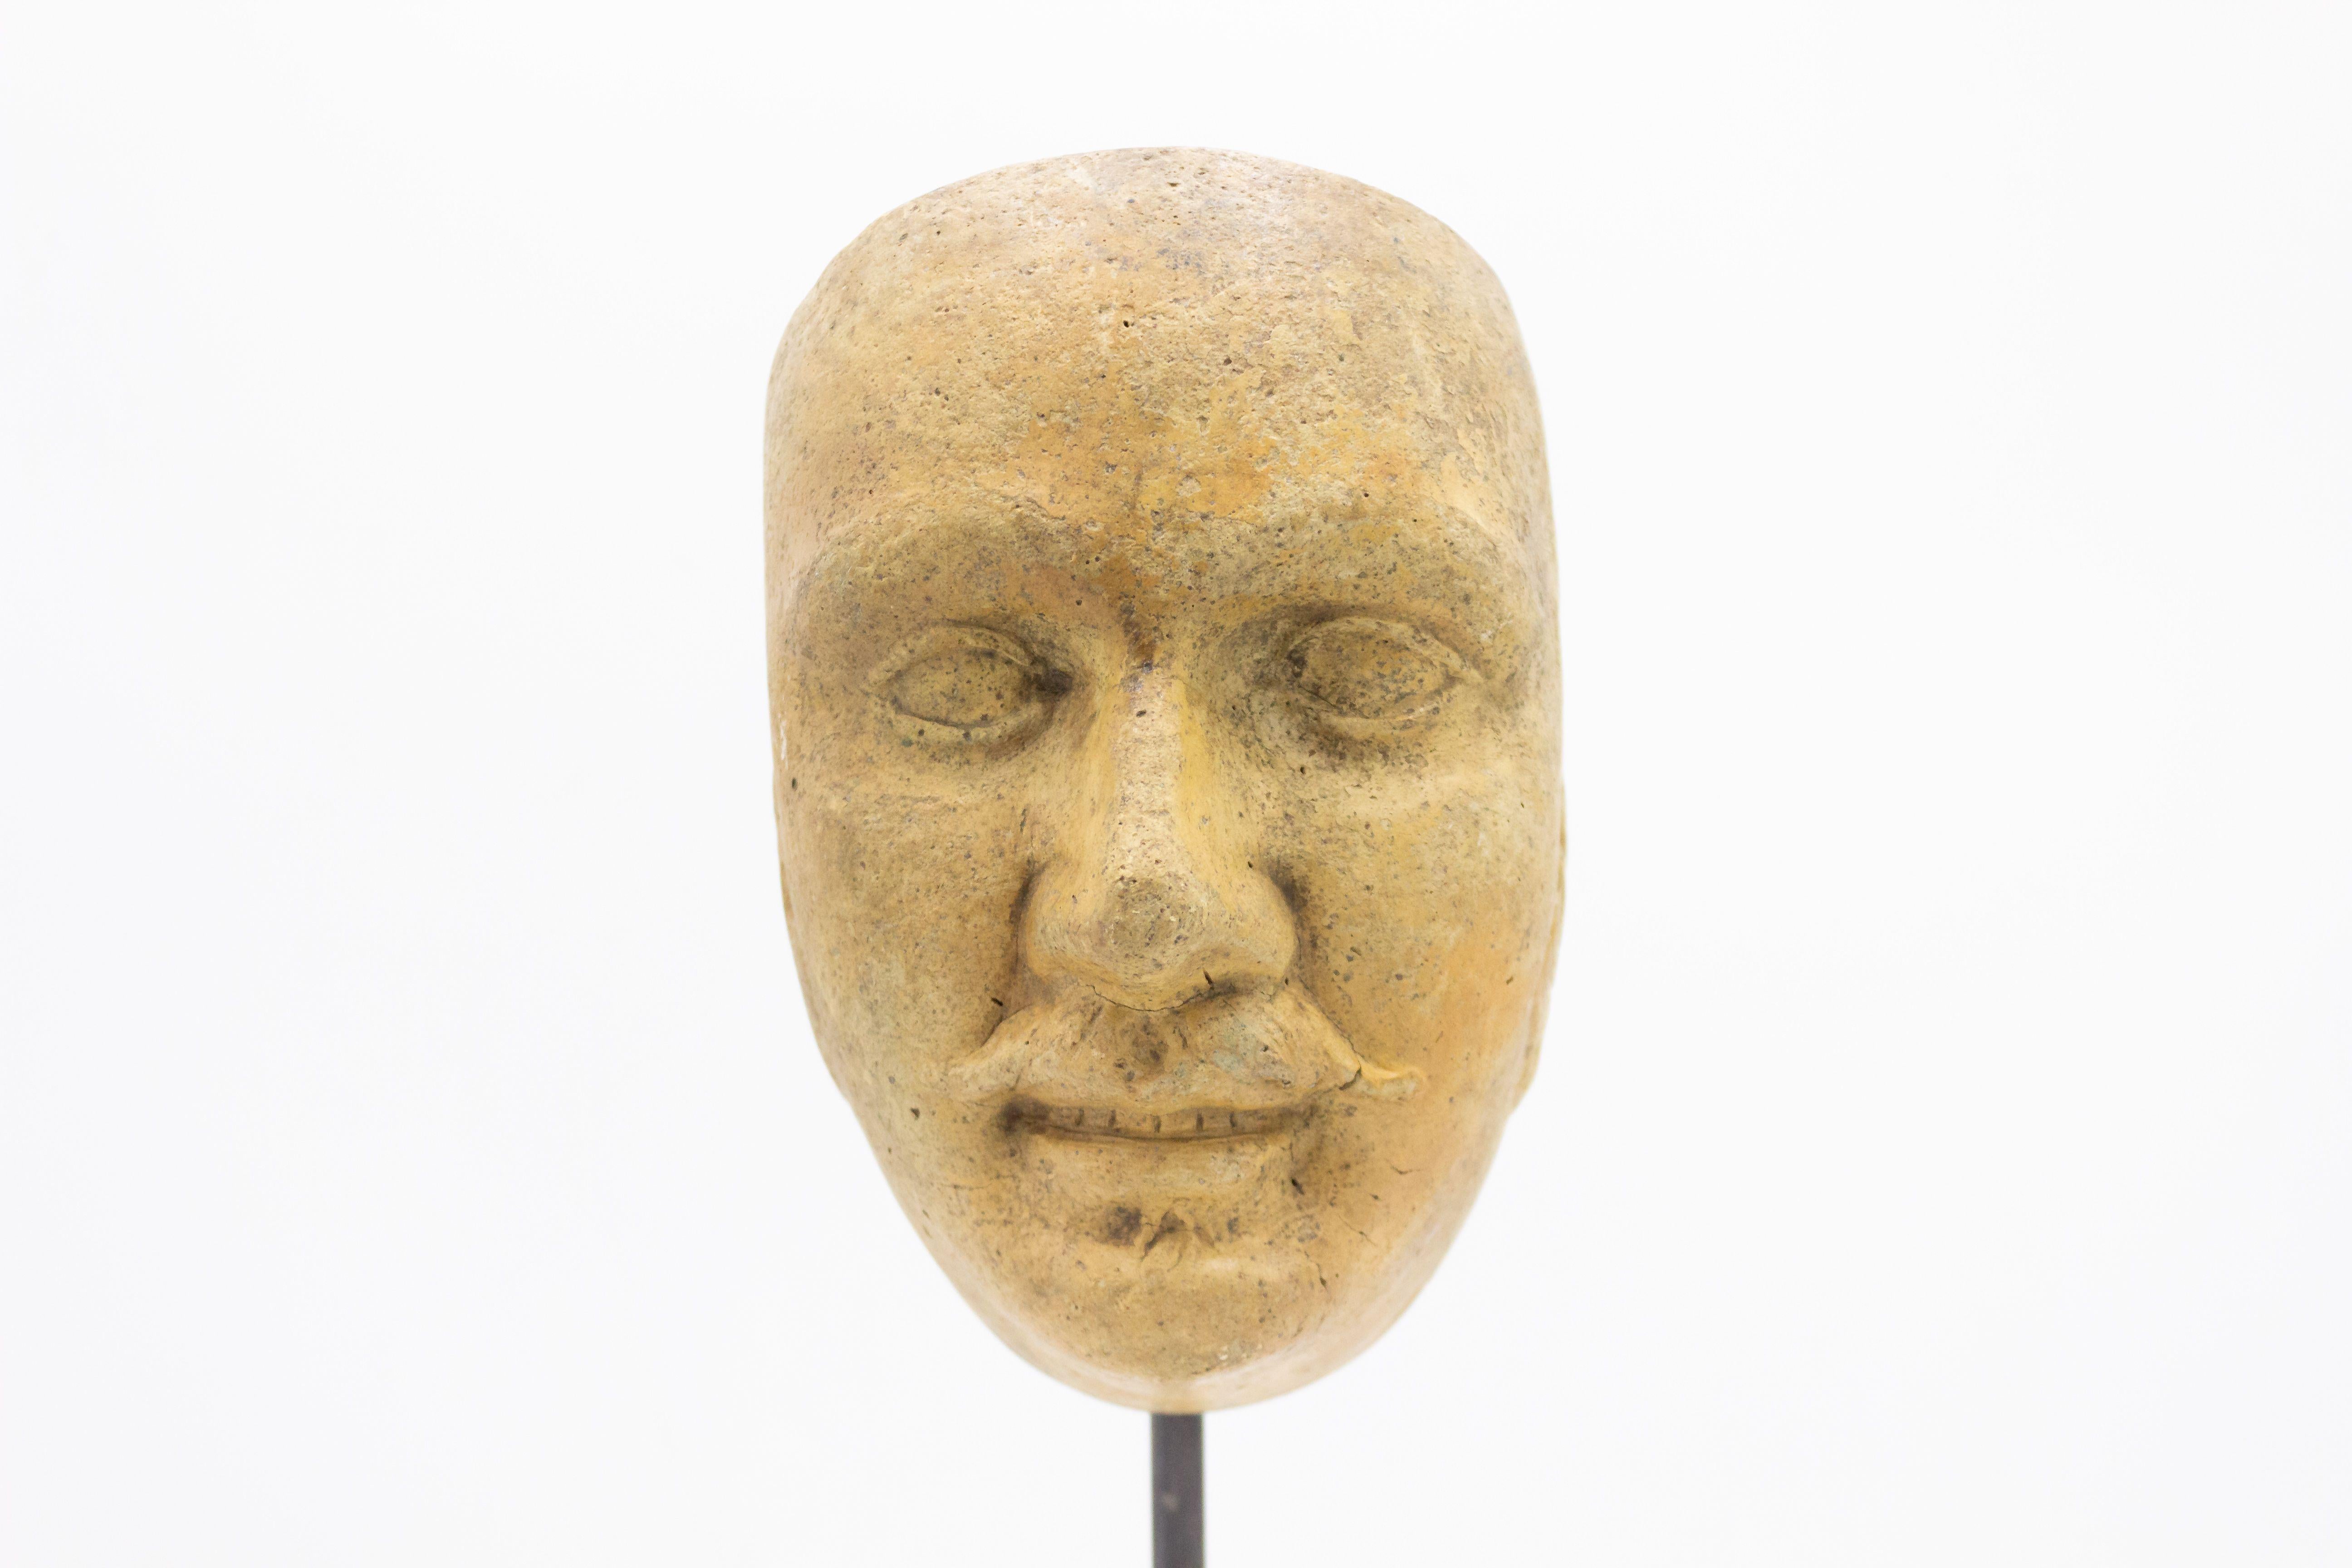 Continental German (late 19th Cent) sculpted terra-cotta master mask mold bust of a grinning man with a mustach and sideburns displayed on a square black marble base stand (part of 39 piece collection).
 